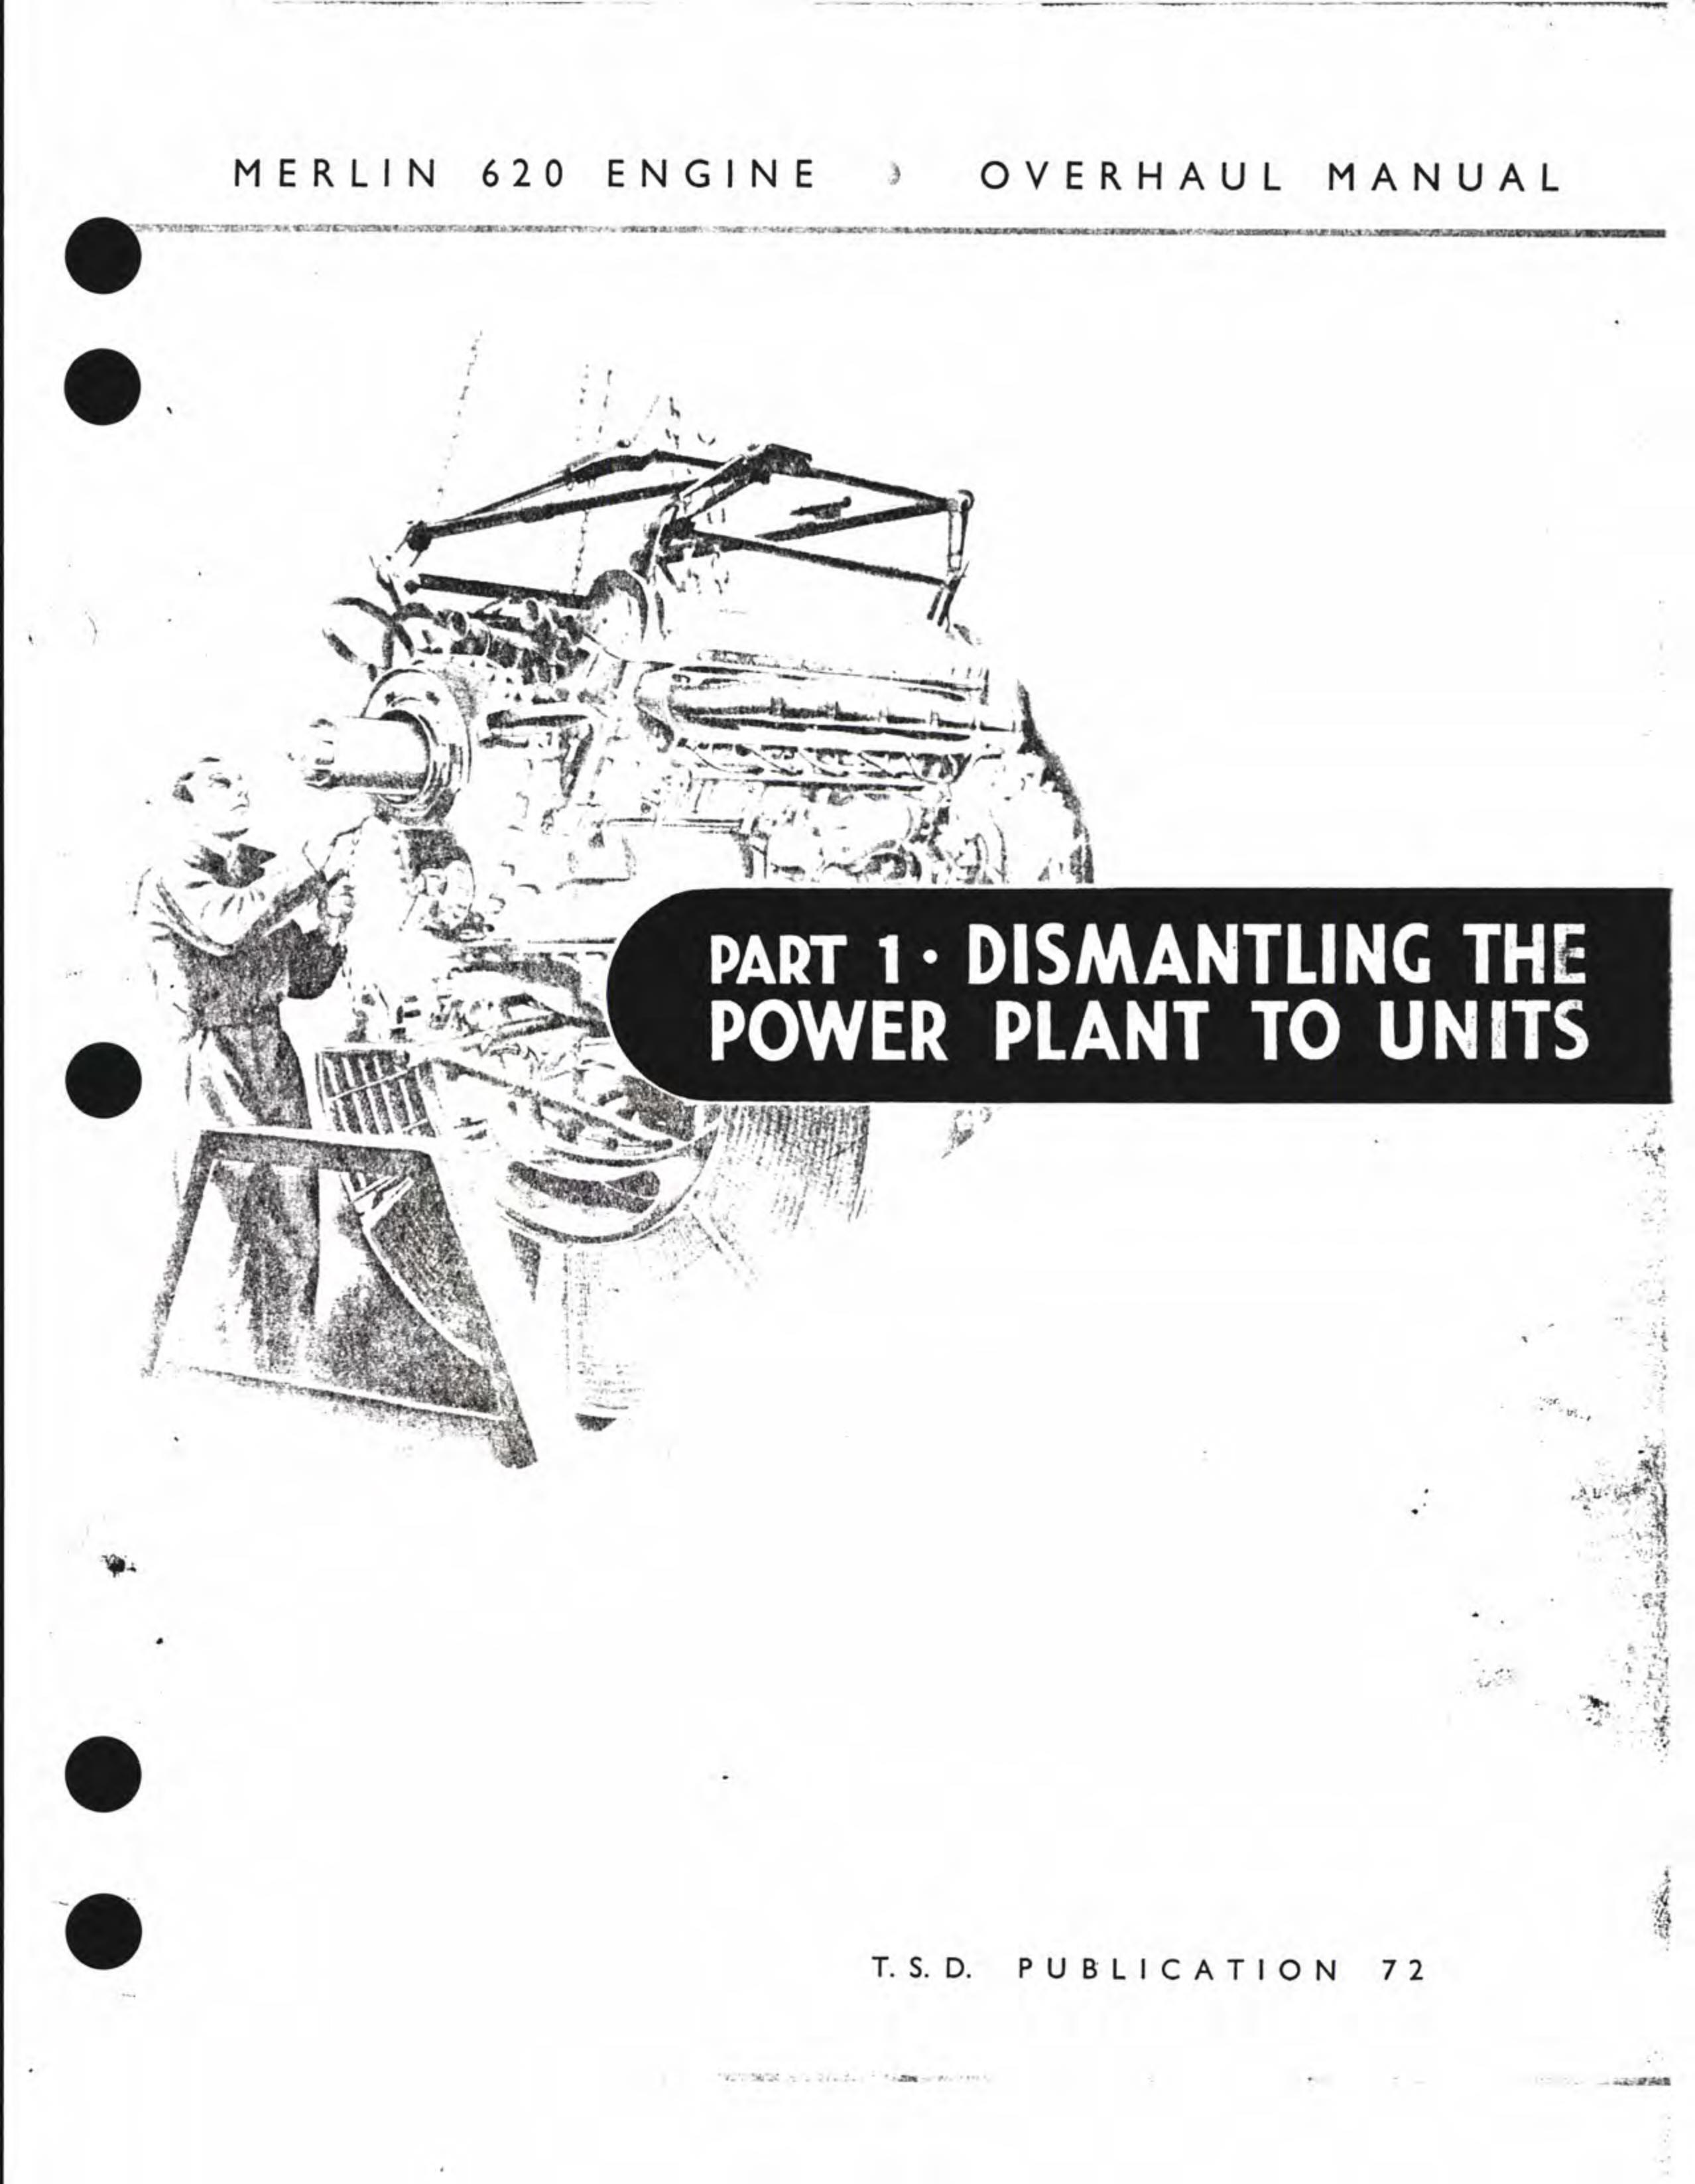 Sample page 11 from AirCorps Library document: Overhaul Manual for Merlin 620 Engine